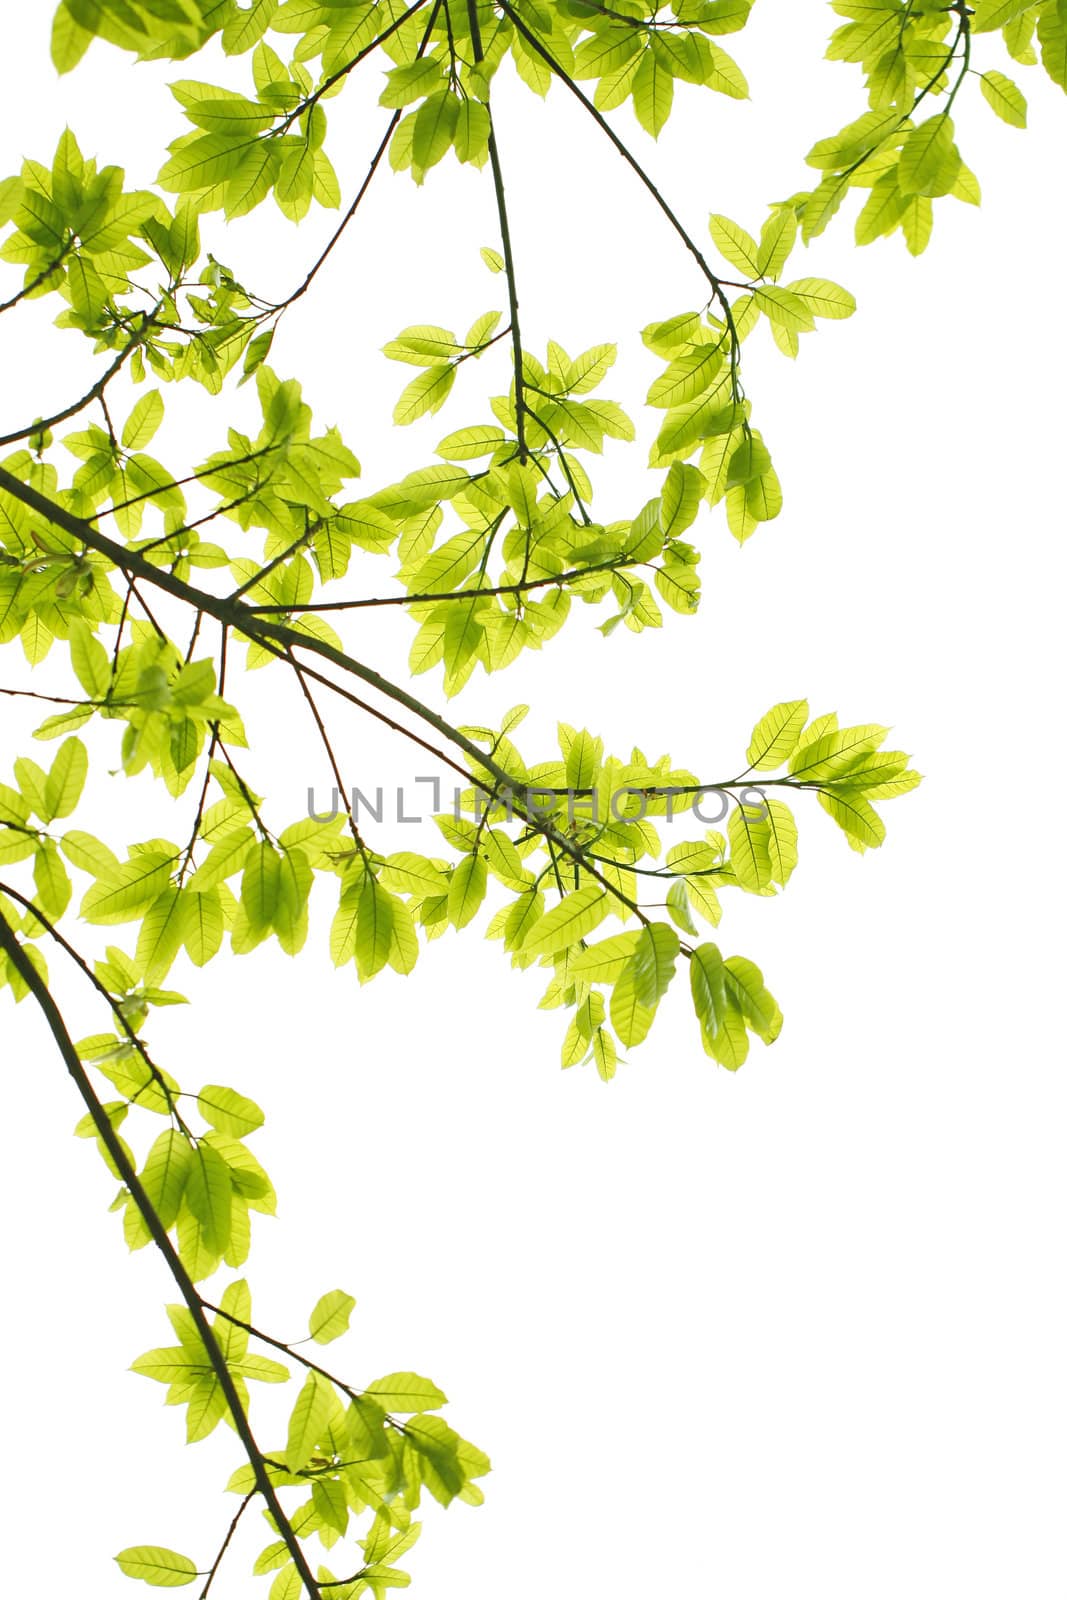 It is a green leaves background.